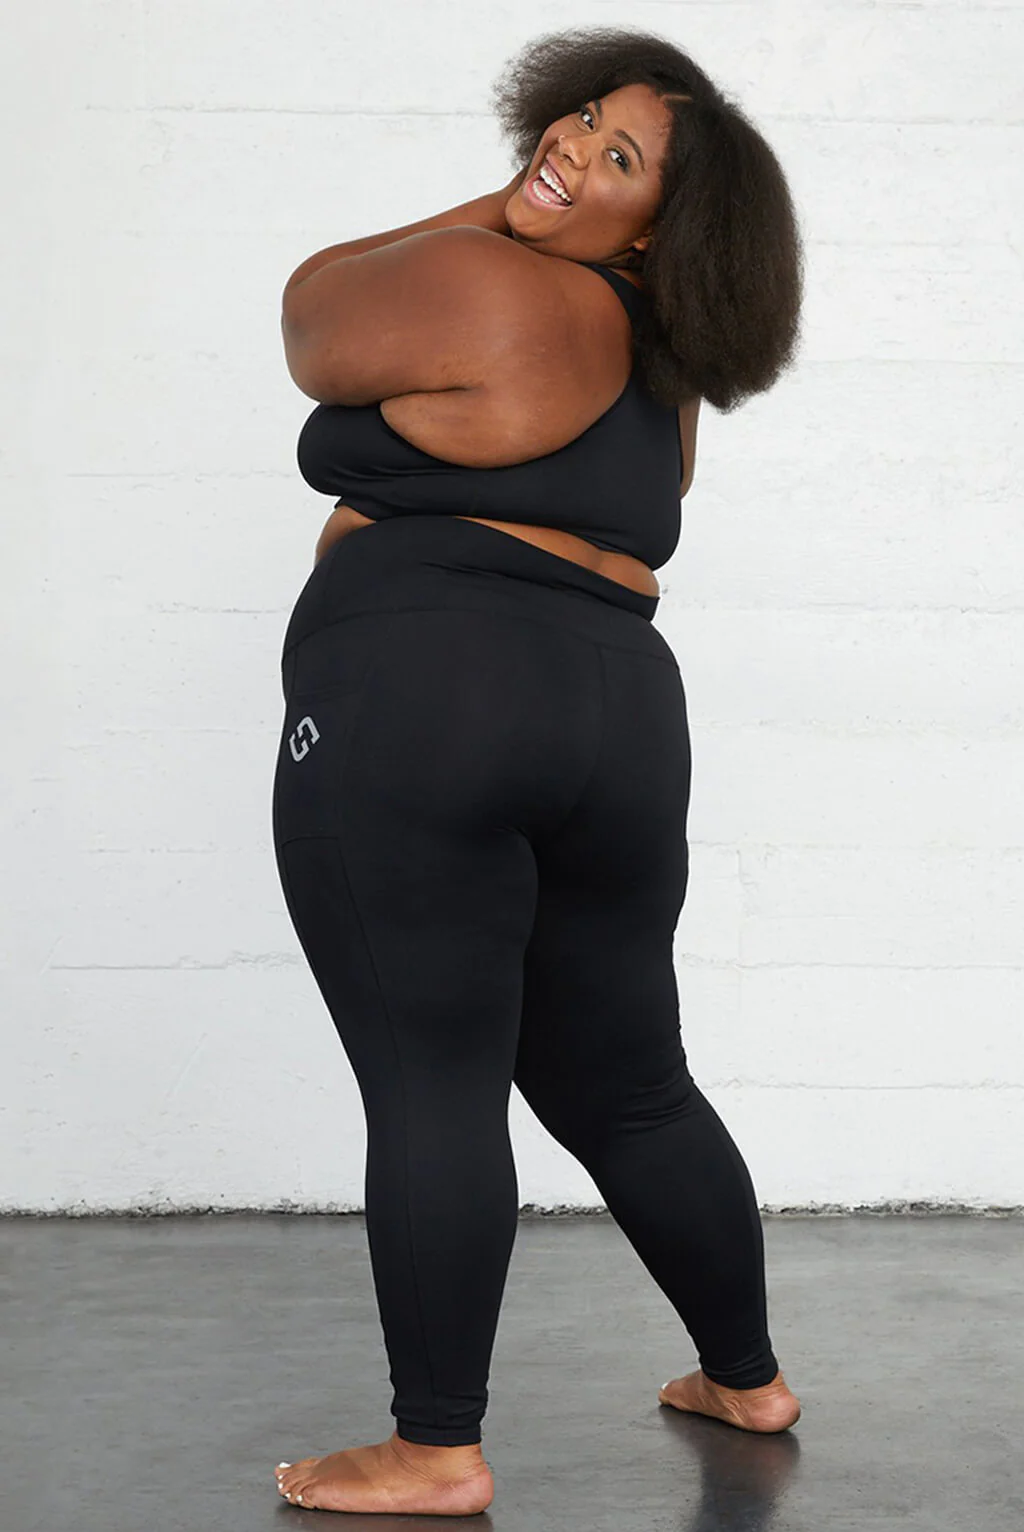 Plus Size Therma-FIT Performance Tights & Leggings.